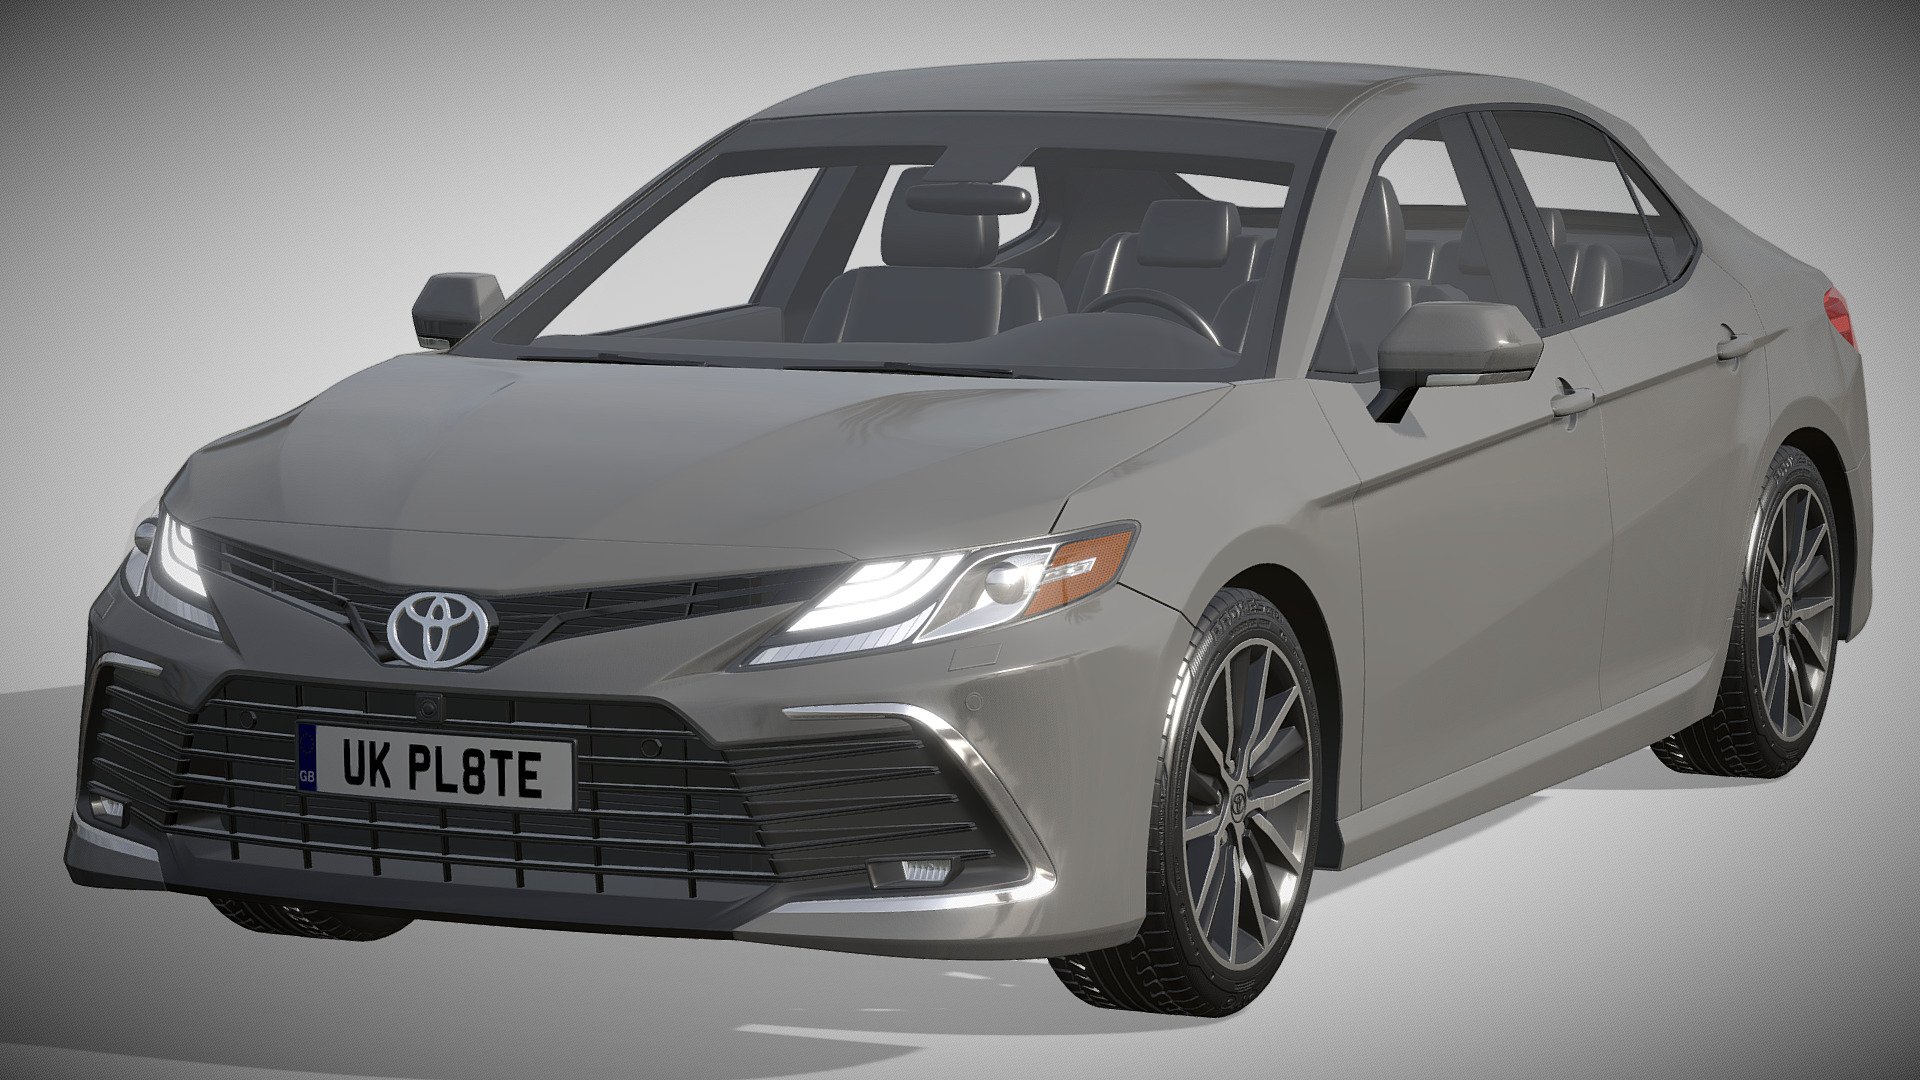 Toyota Camry LE Hybrid 2023

https://www.toyota.com/camryhybrid/

Clean geometry Light weight model, yet completely detailed for HI-Res renders. Use for movies, Advertisements or games

Corona render and materials

All textures include in *.rar files

Lighting setup is not included in the file! - Toyota Camry LE Hybrid - Buy Royalty Free 3D model by zifir3d 3d model